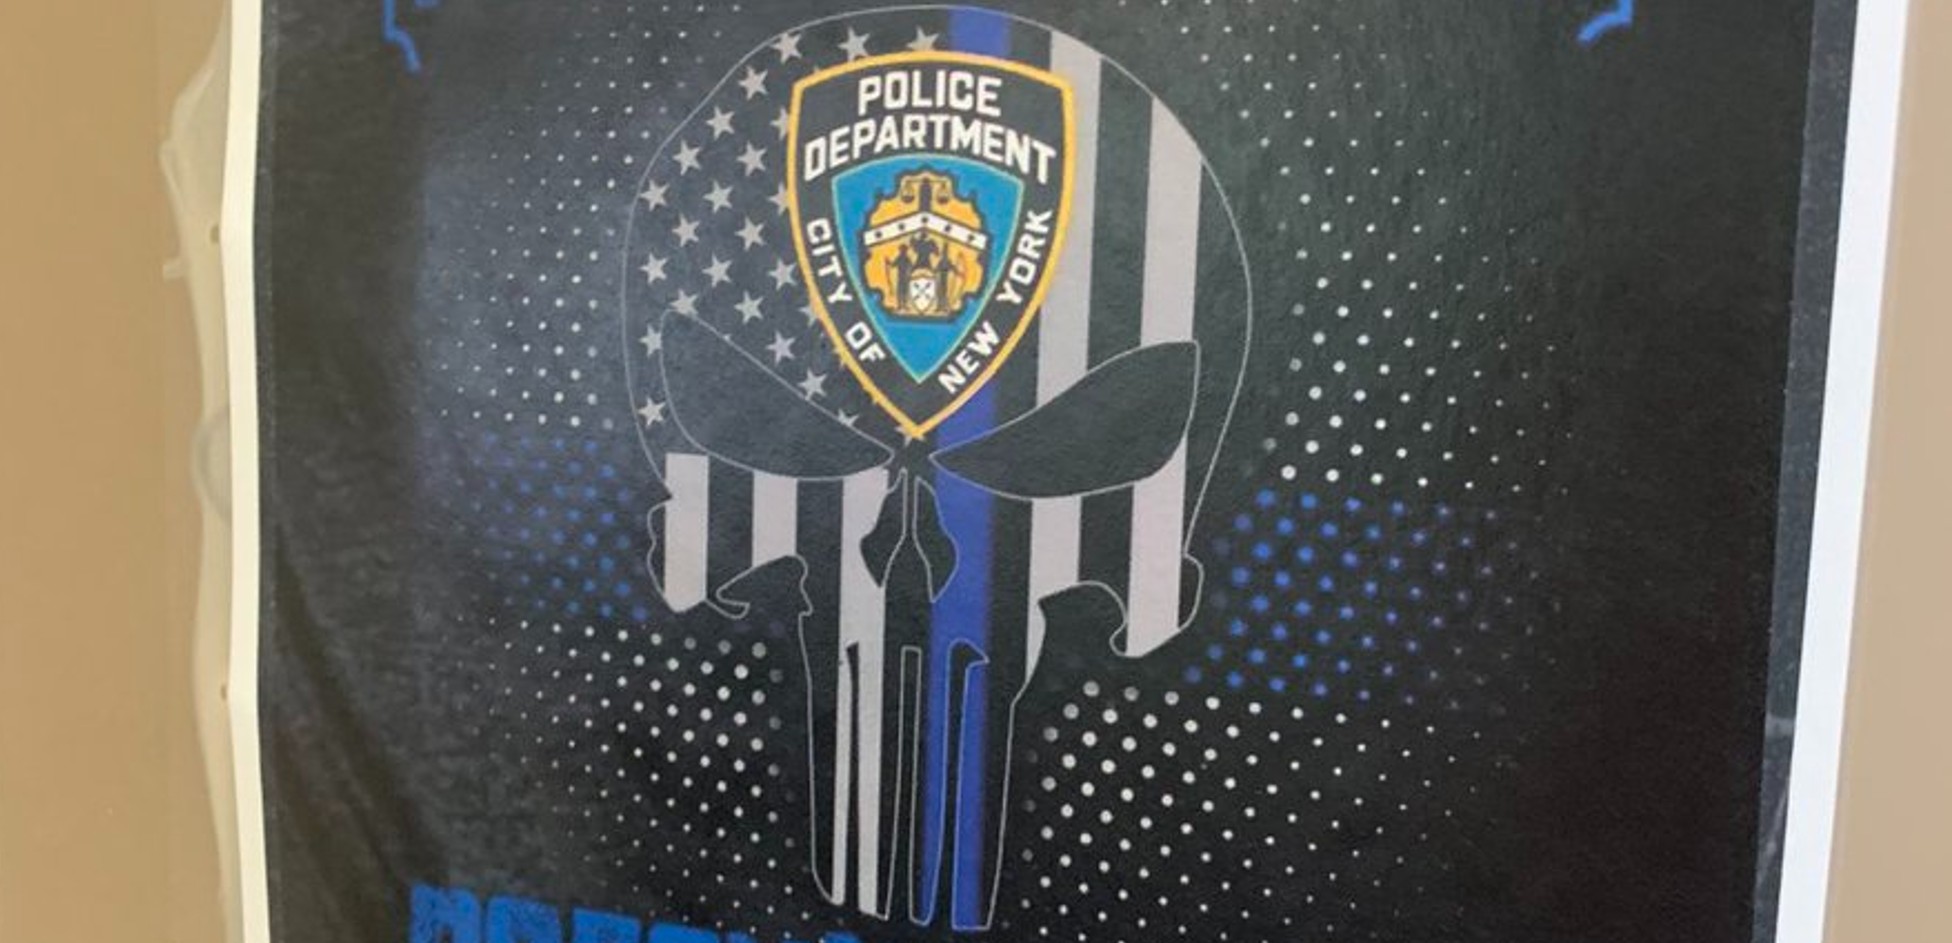 Part of a flier hung in the NYPD-run Sex Offender Monitoring Unit in Manhattan.